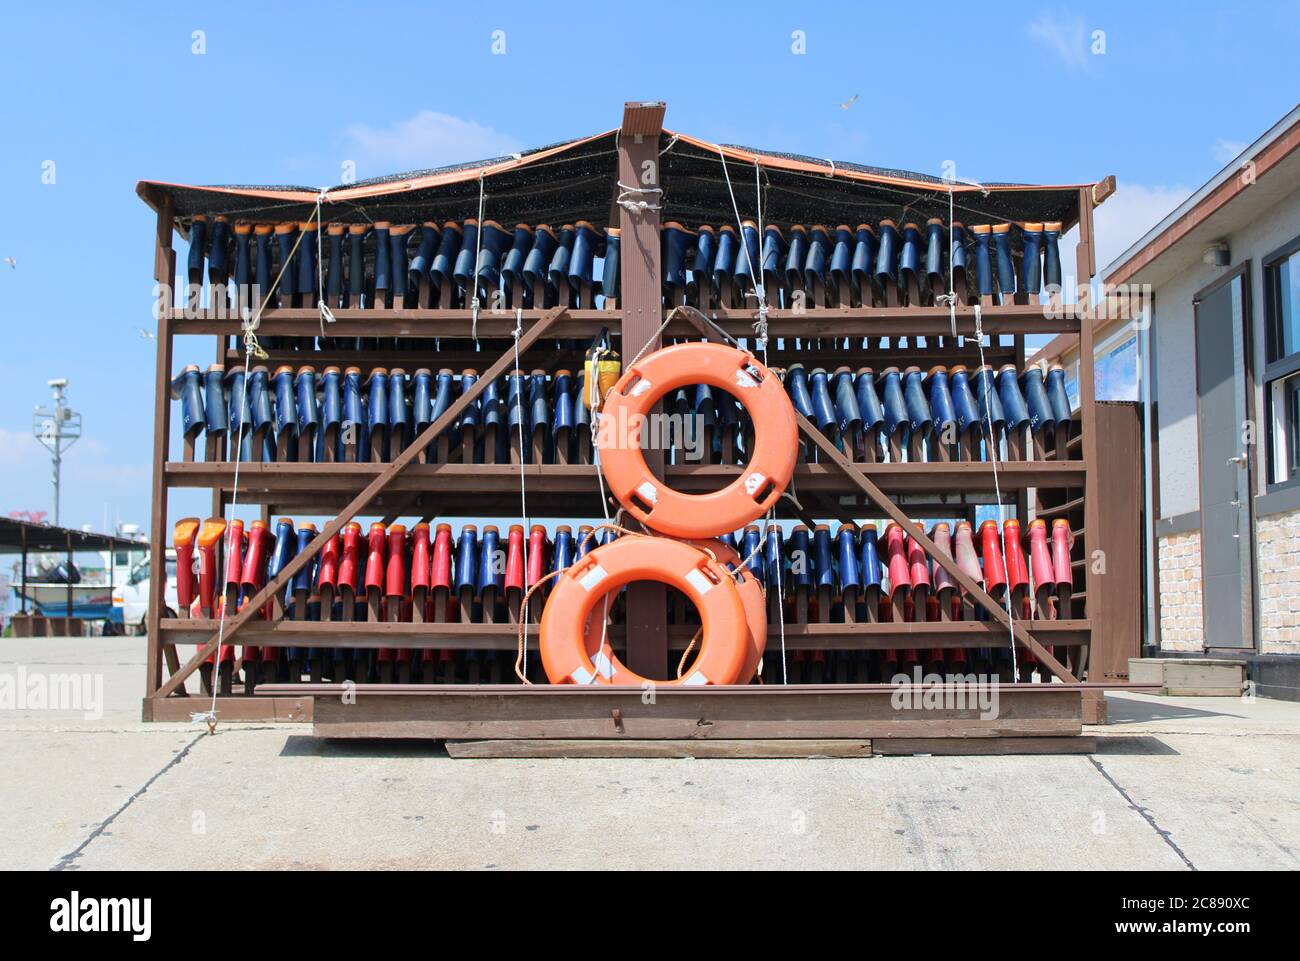 Rubber boot rental shack with bright orange lifesavers, near a clam digging area Stock Photo